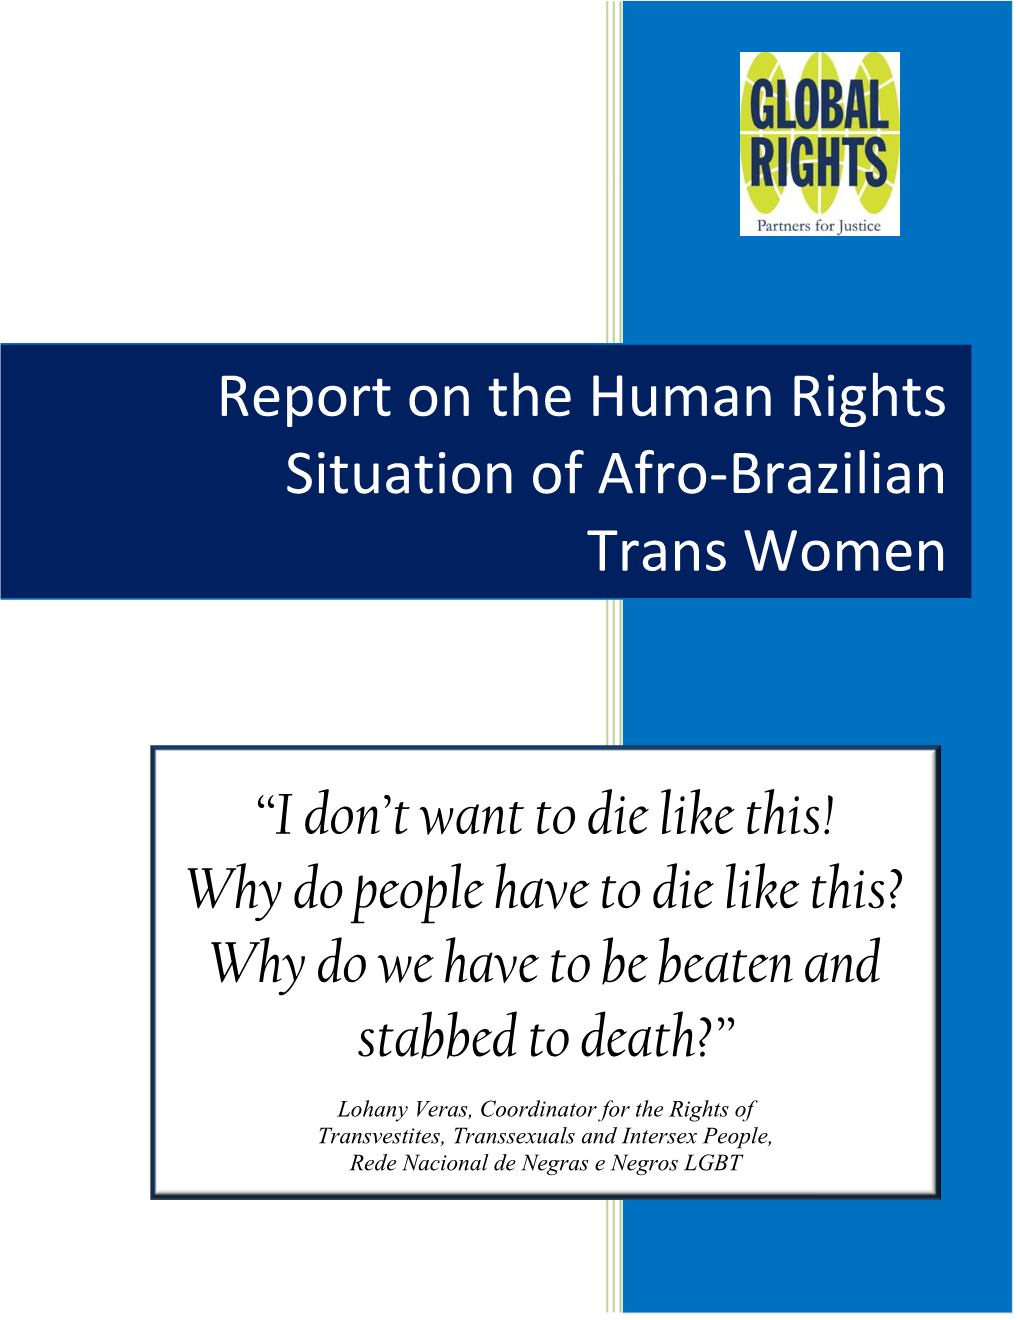 Report on the Human Rights Situation of Afro-Brazilian Trans Women